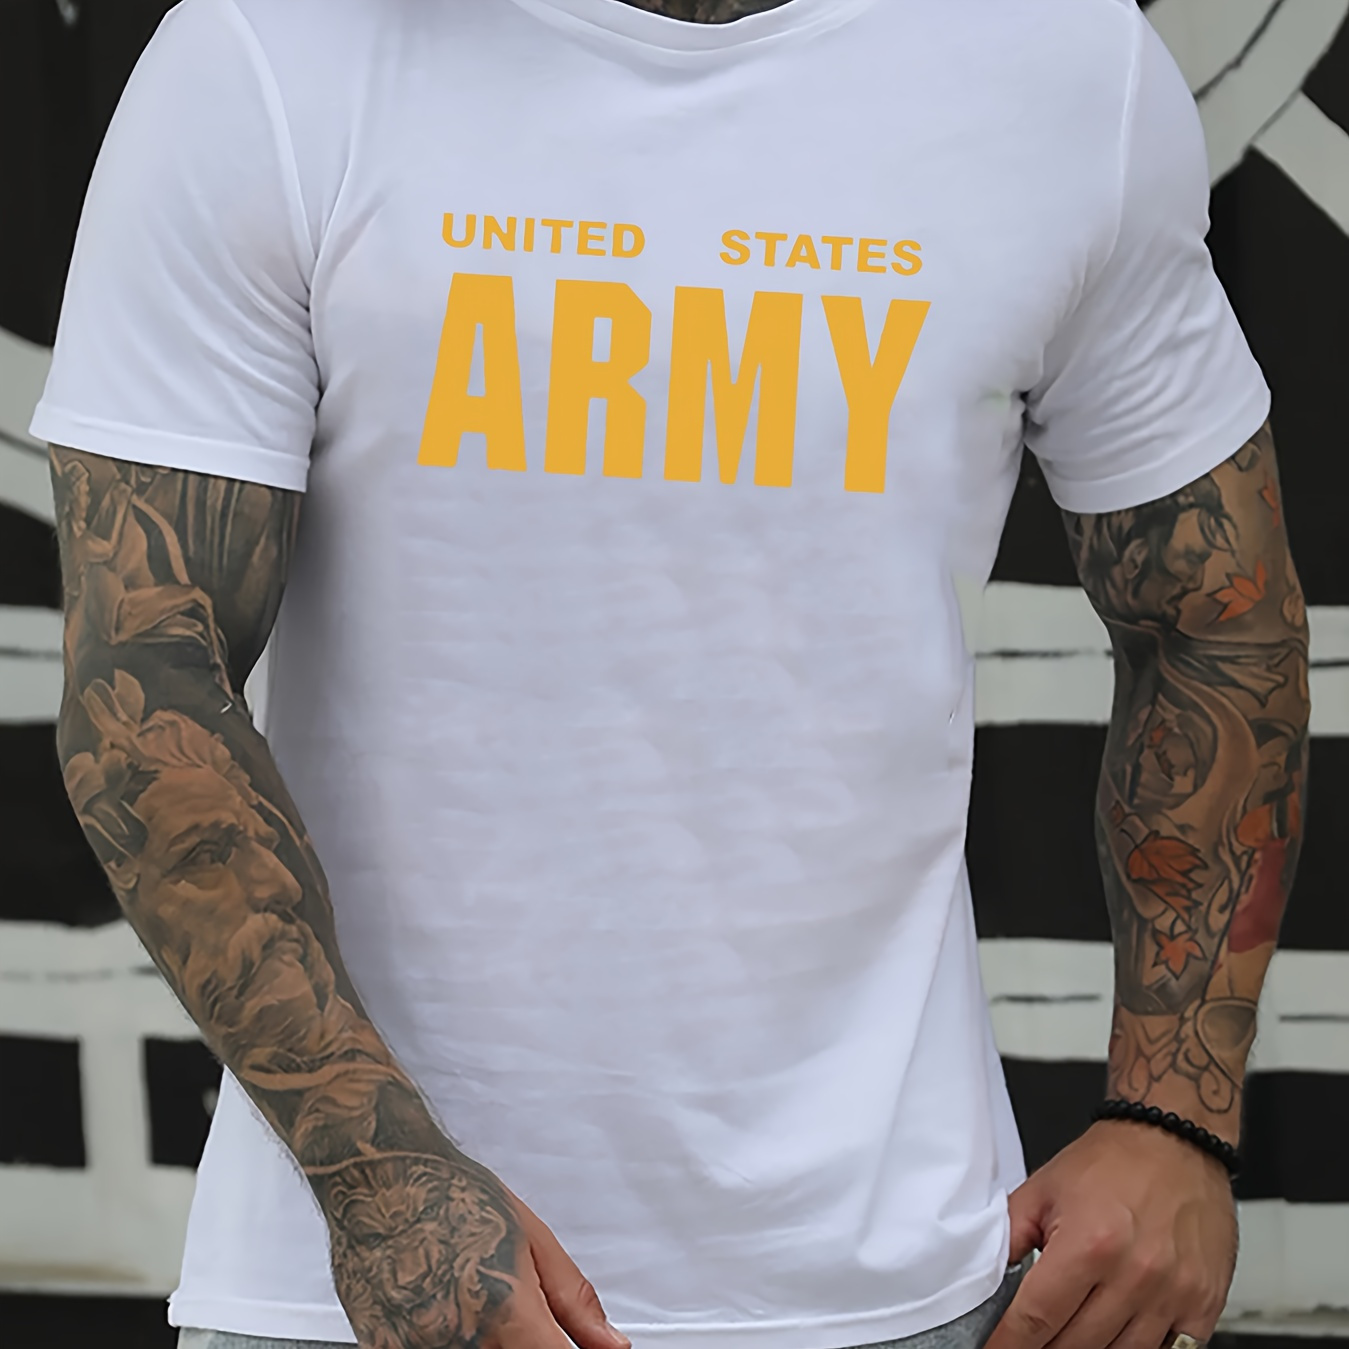 

United States Army Print T Shirt, Tees For Men, Casual Short Sleeve T-shirt For Summer